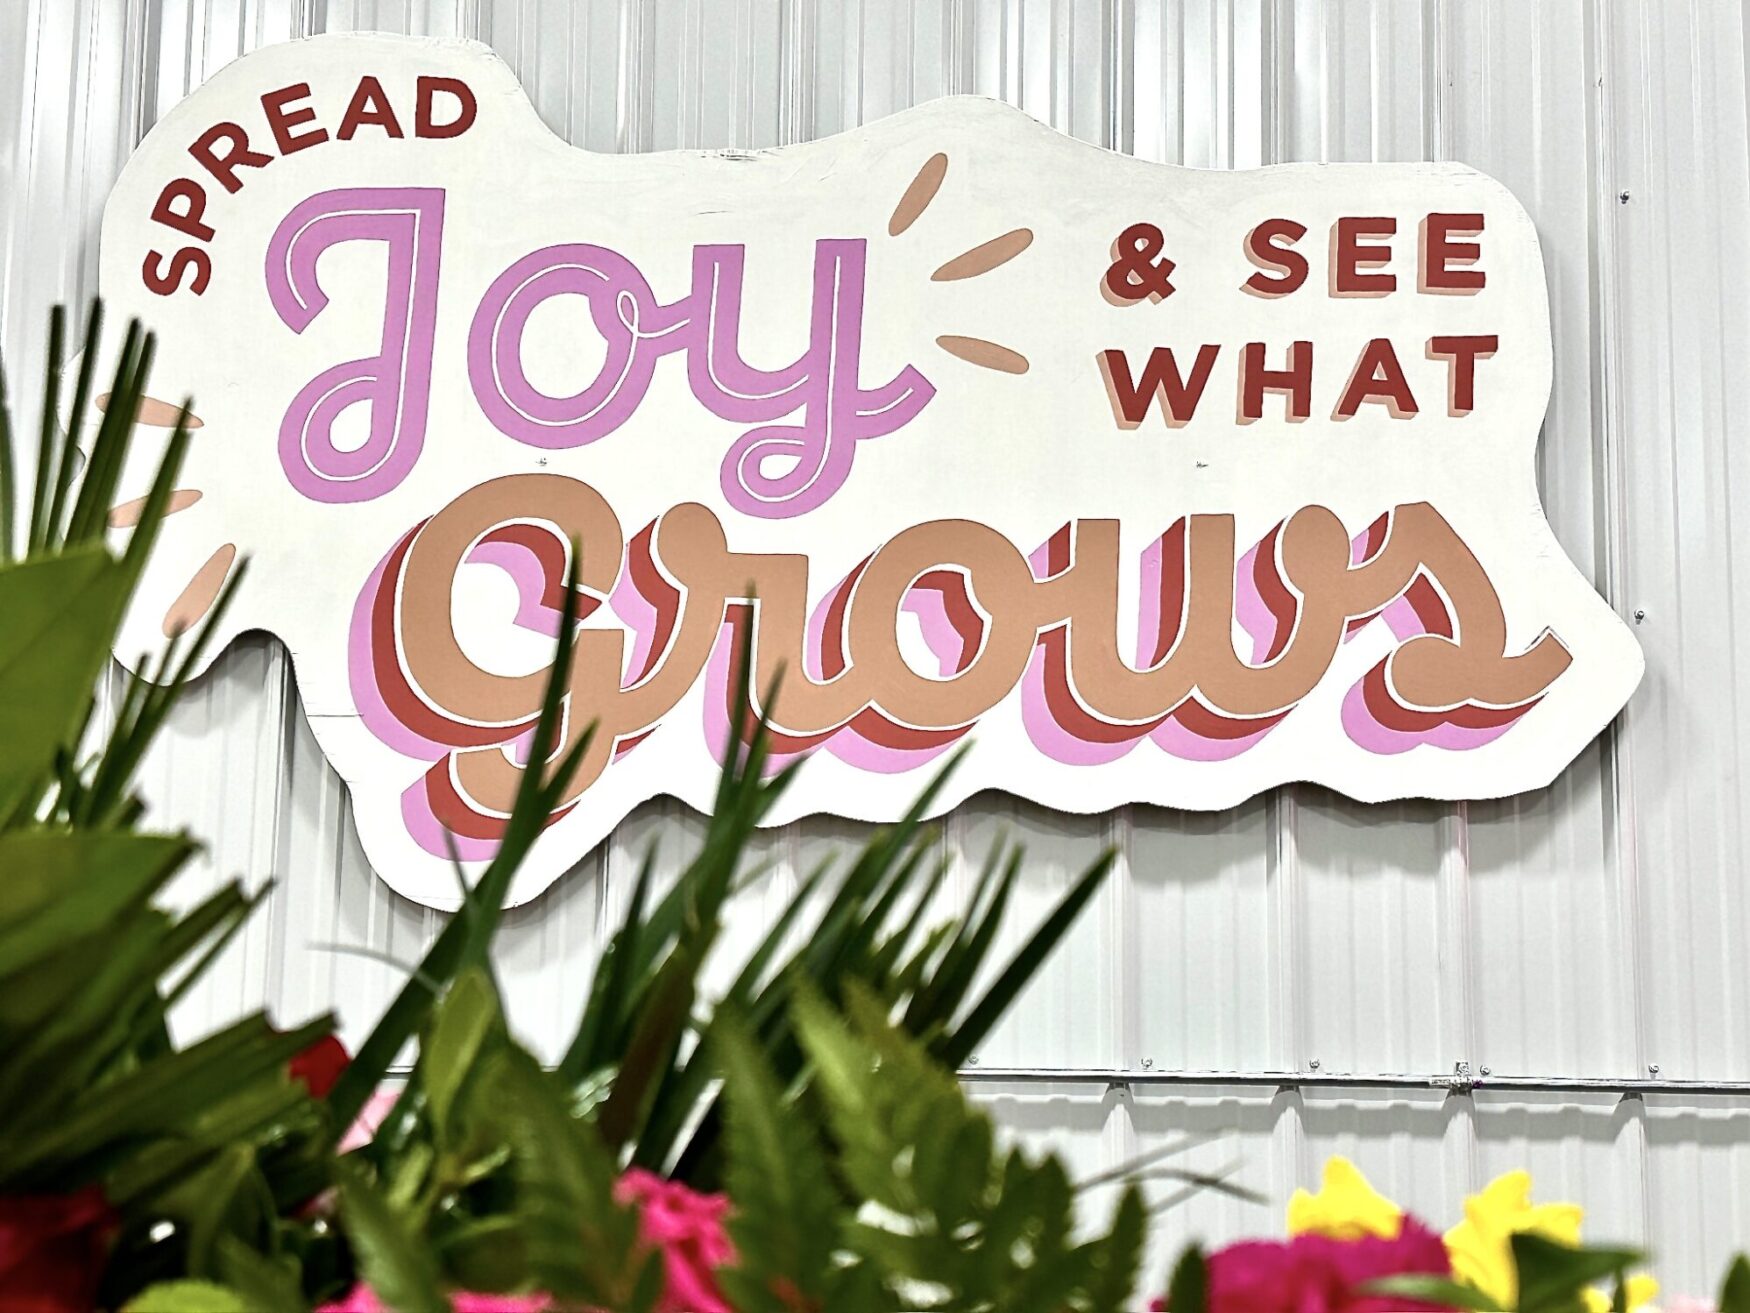 A sign that says "Spread Joy & See What Grows" at Hope Blooms